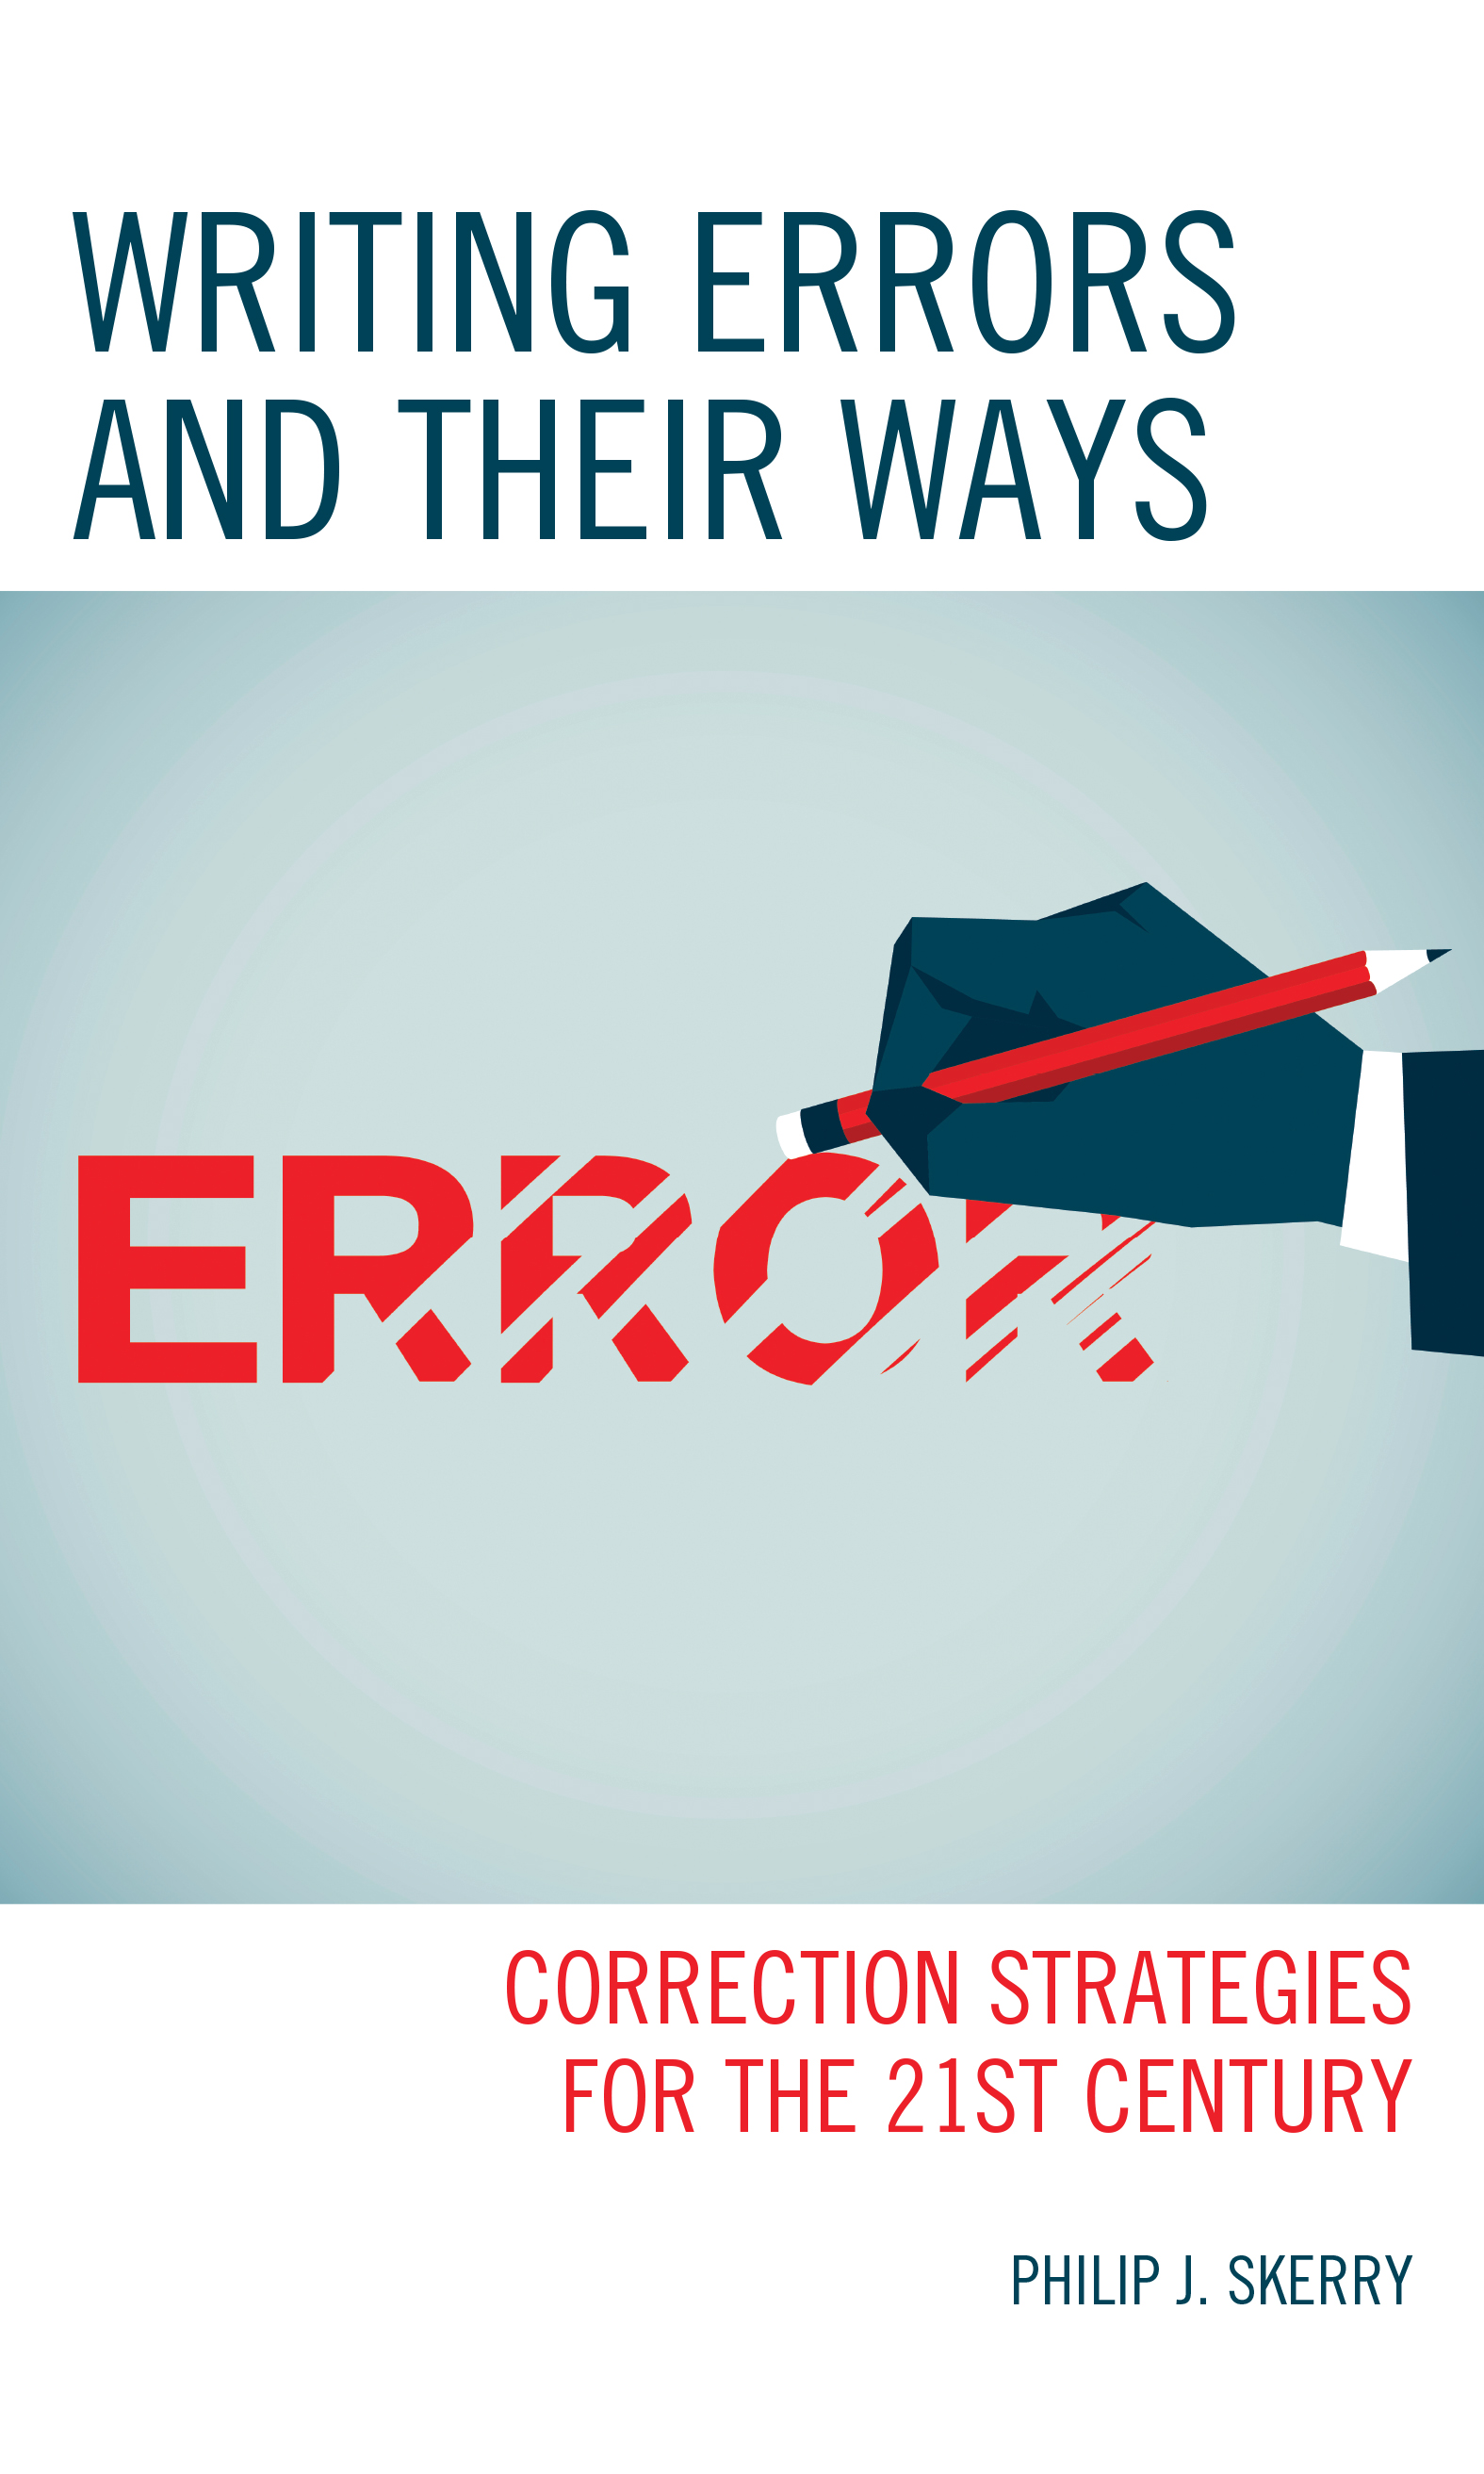 Writing Errors and Their Ways: Correction Strategies for the 21st Century